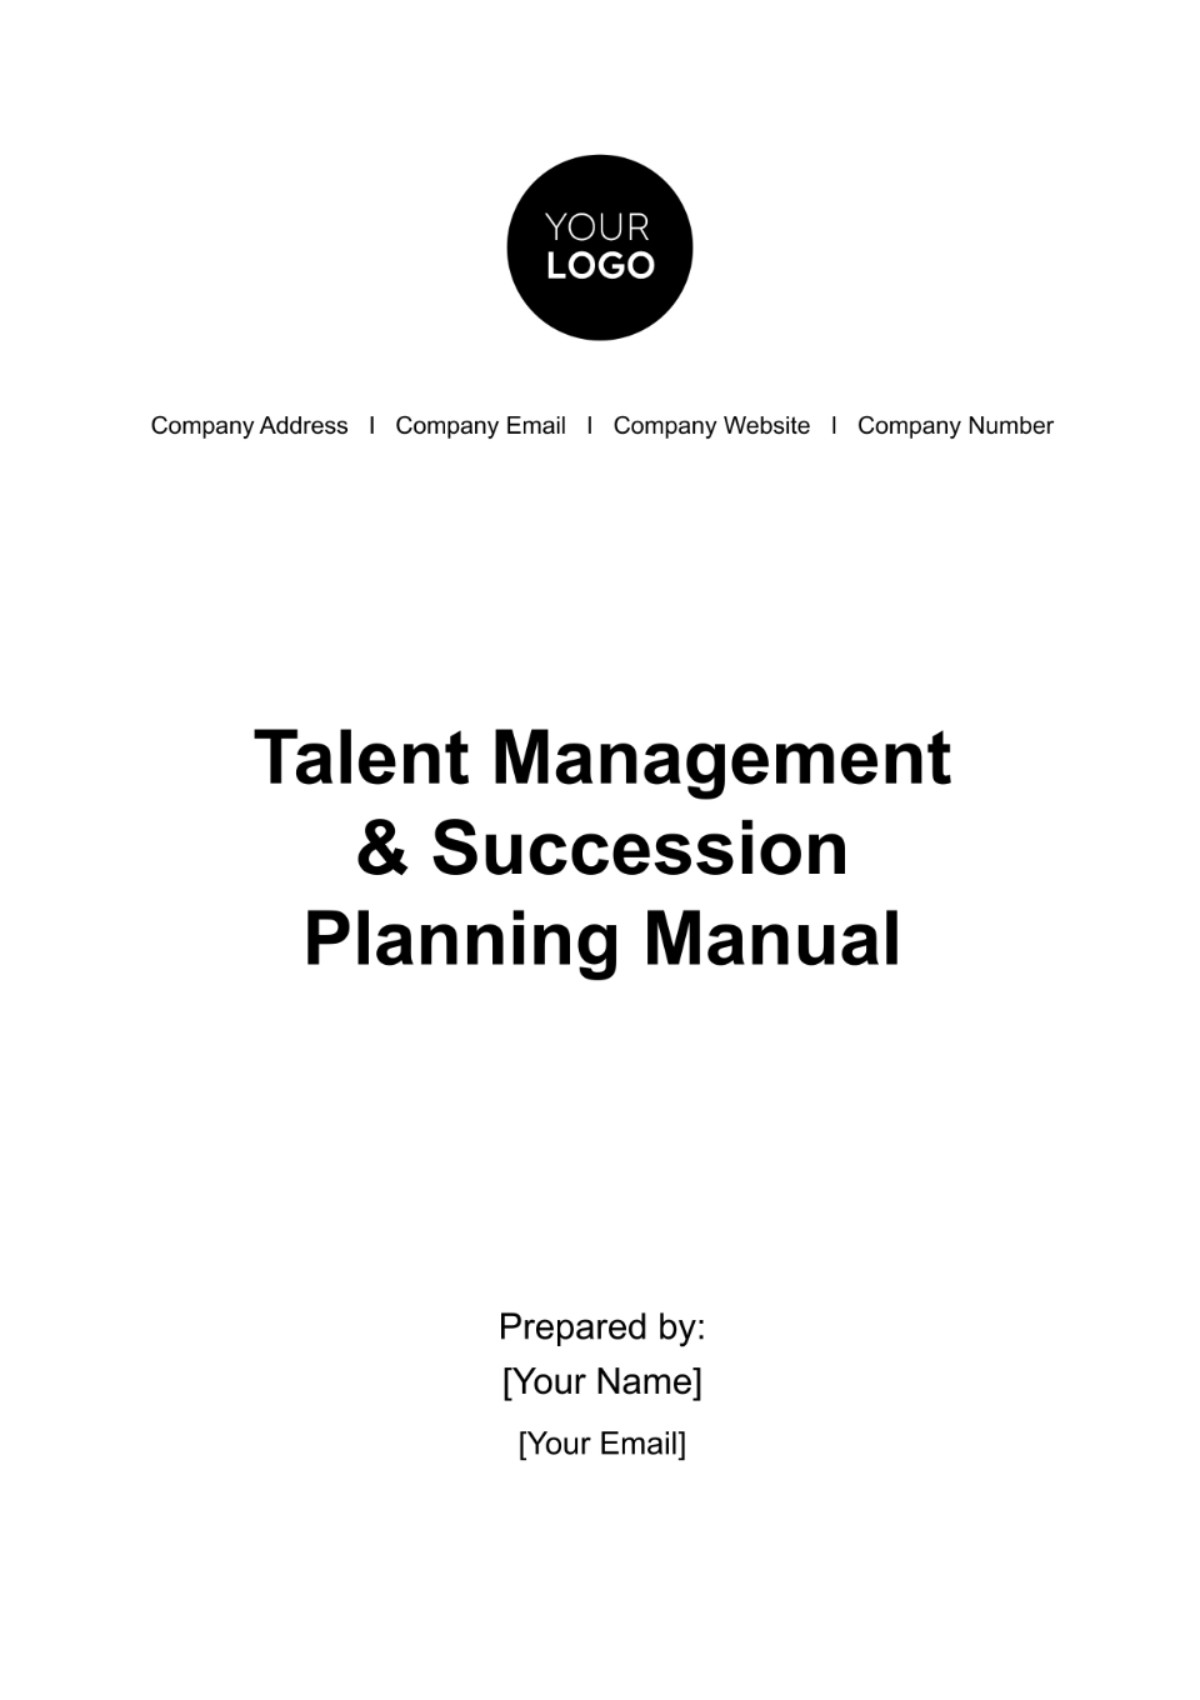 Free Talent Management & Succession Planning Manual HR Template